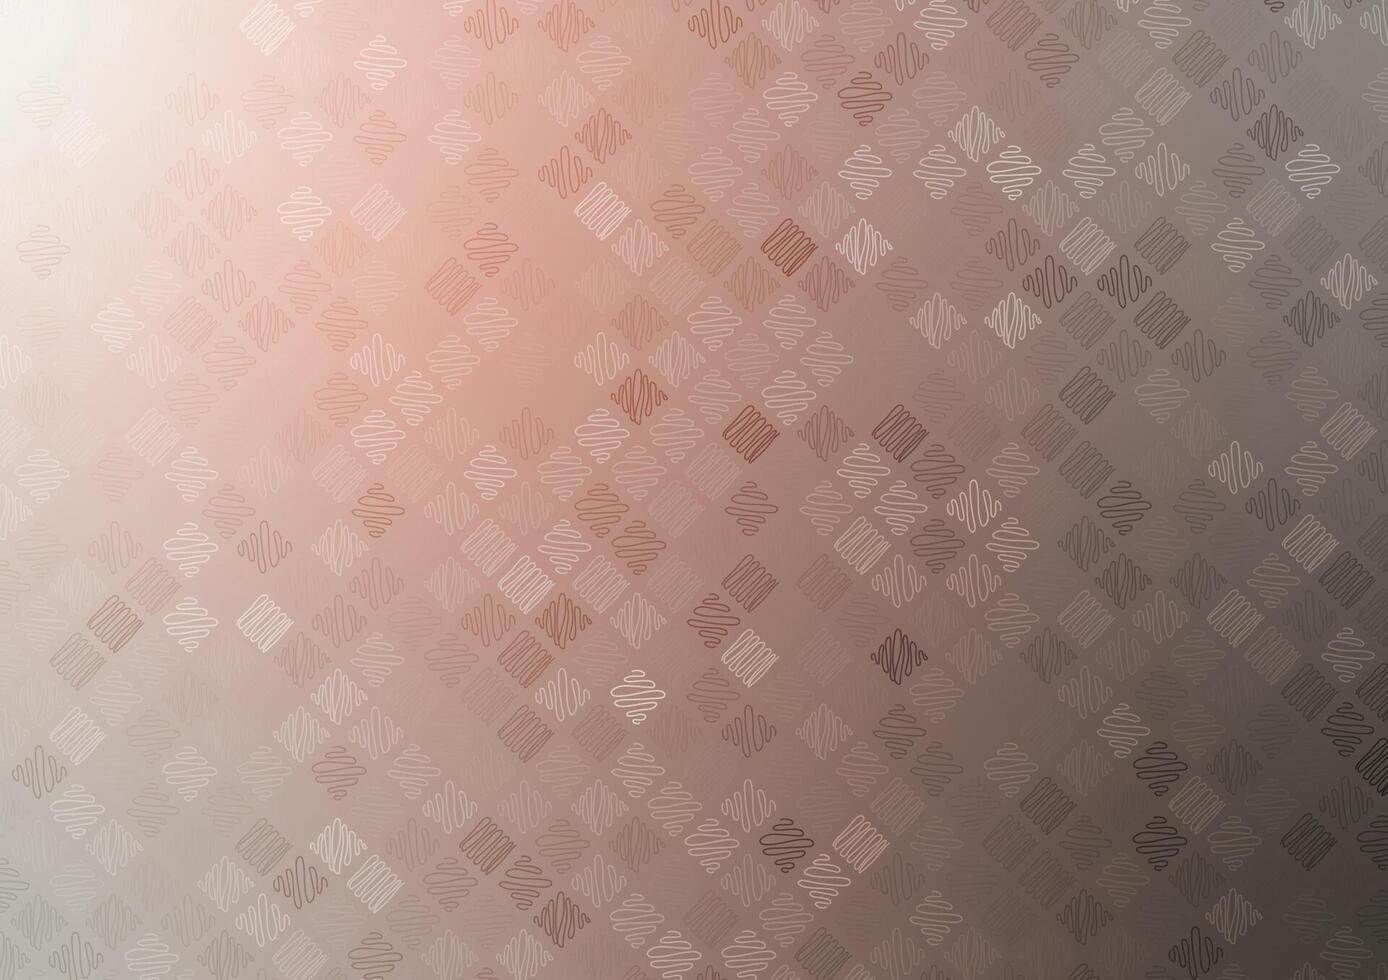 Brown jigsaw connect square abstract background vector